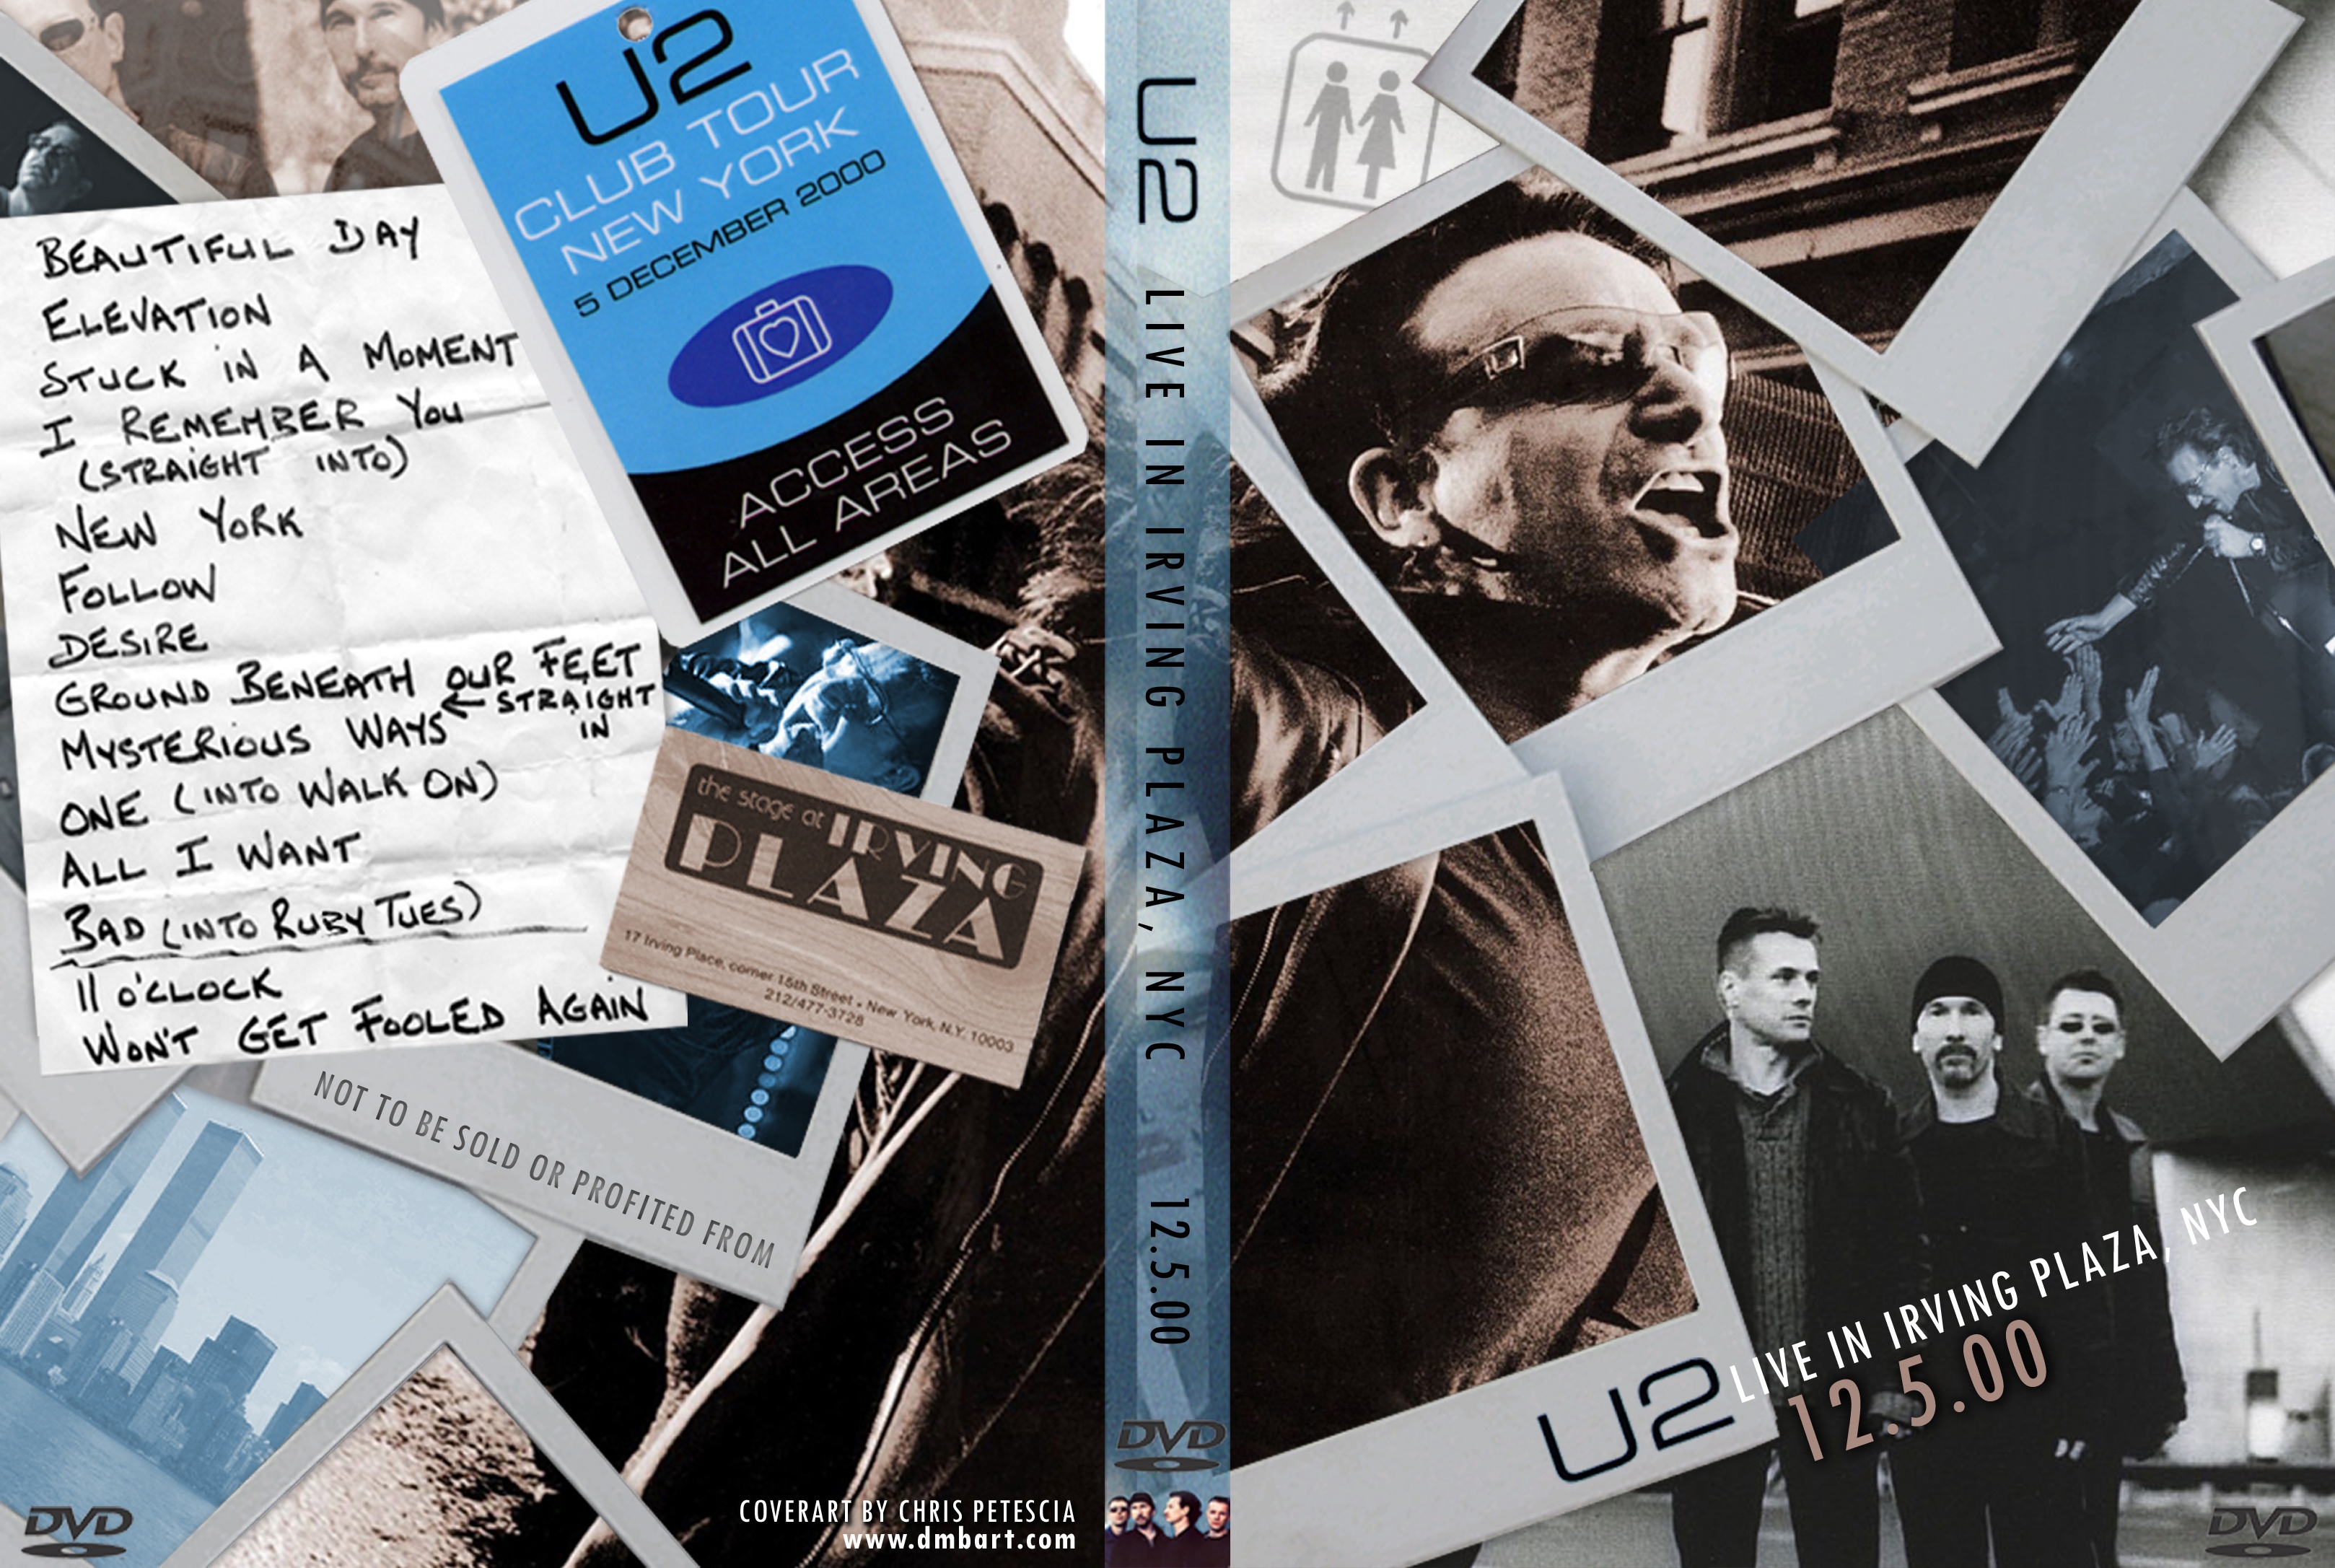 Jaquette DVD U2 live in irving plaza